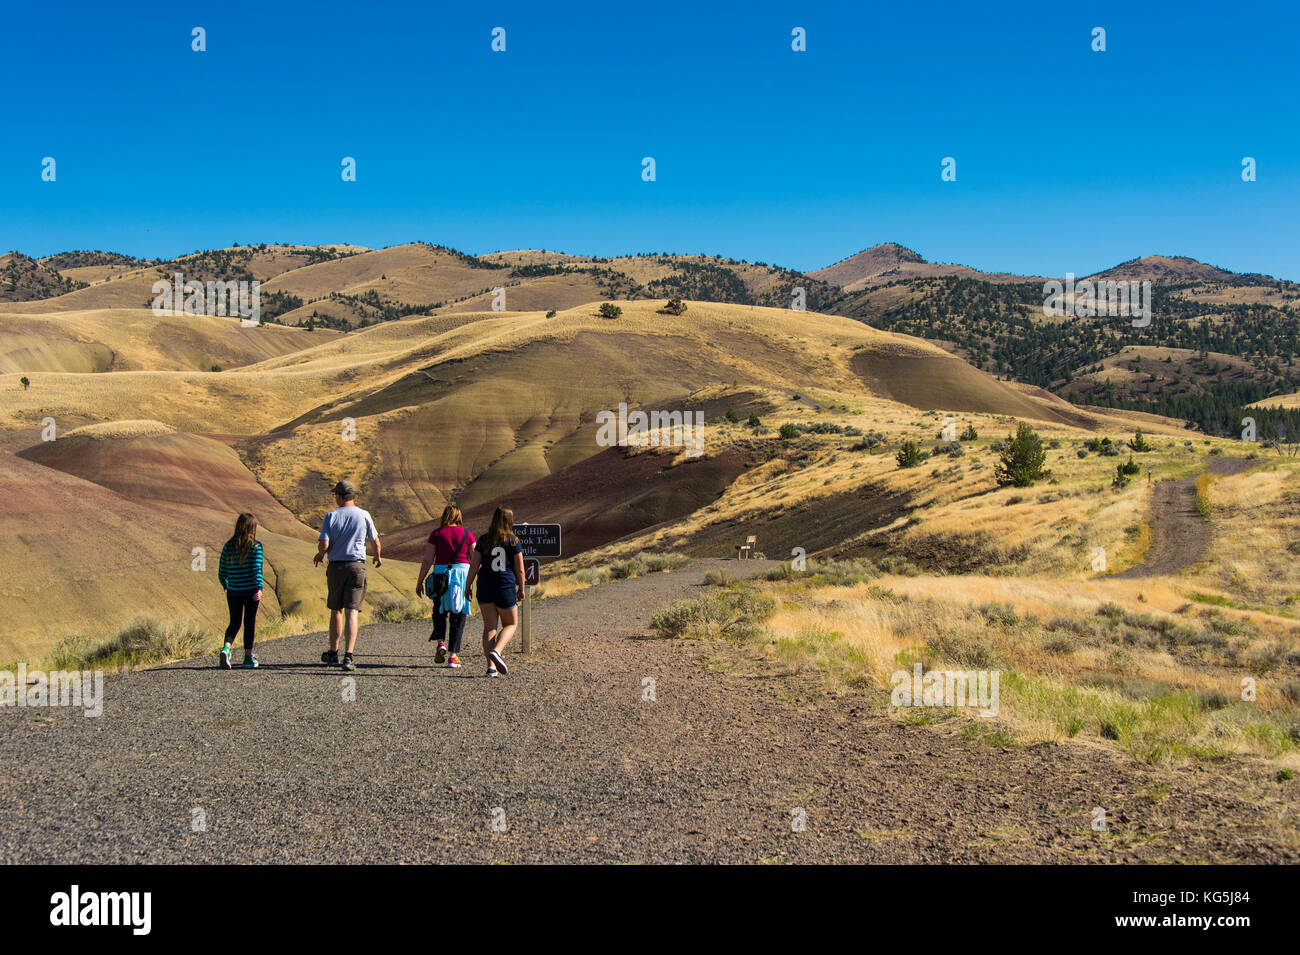 Hikers walking in the Painted hills unit in the John Day fossil beds National Monument, Oregon, USA Stock Photo